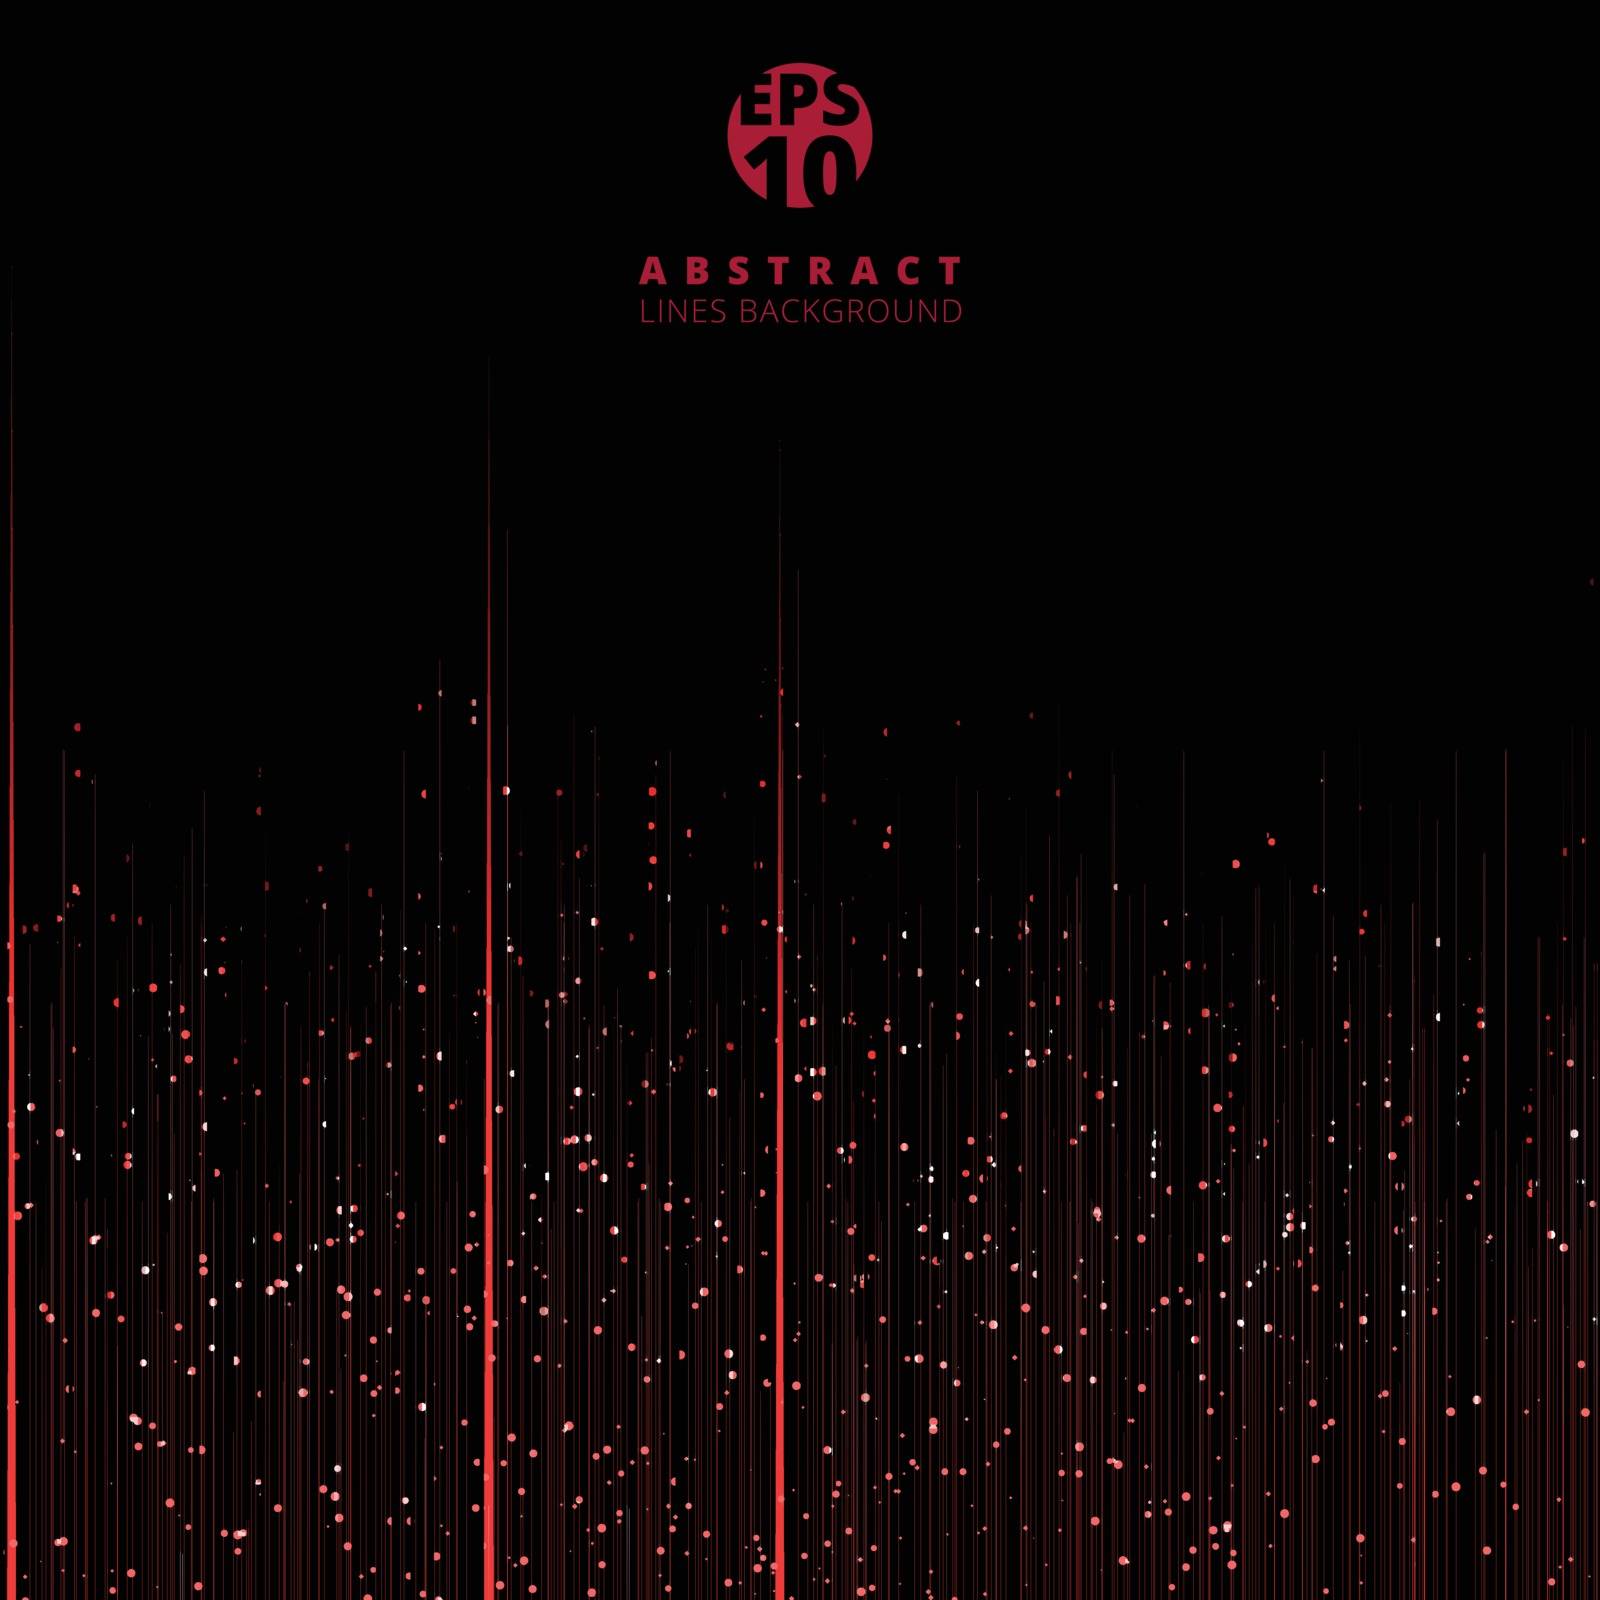 Abstract technology red lines motion on black background with copy space. Vector illustration